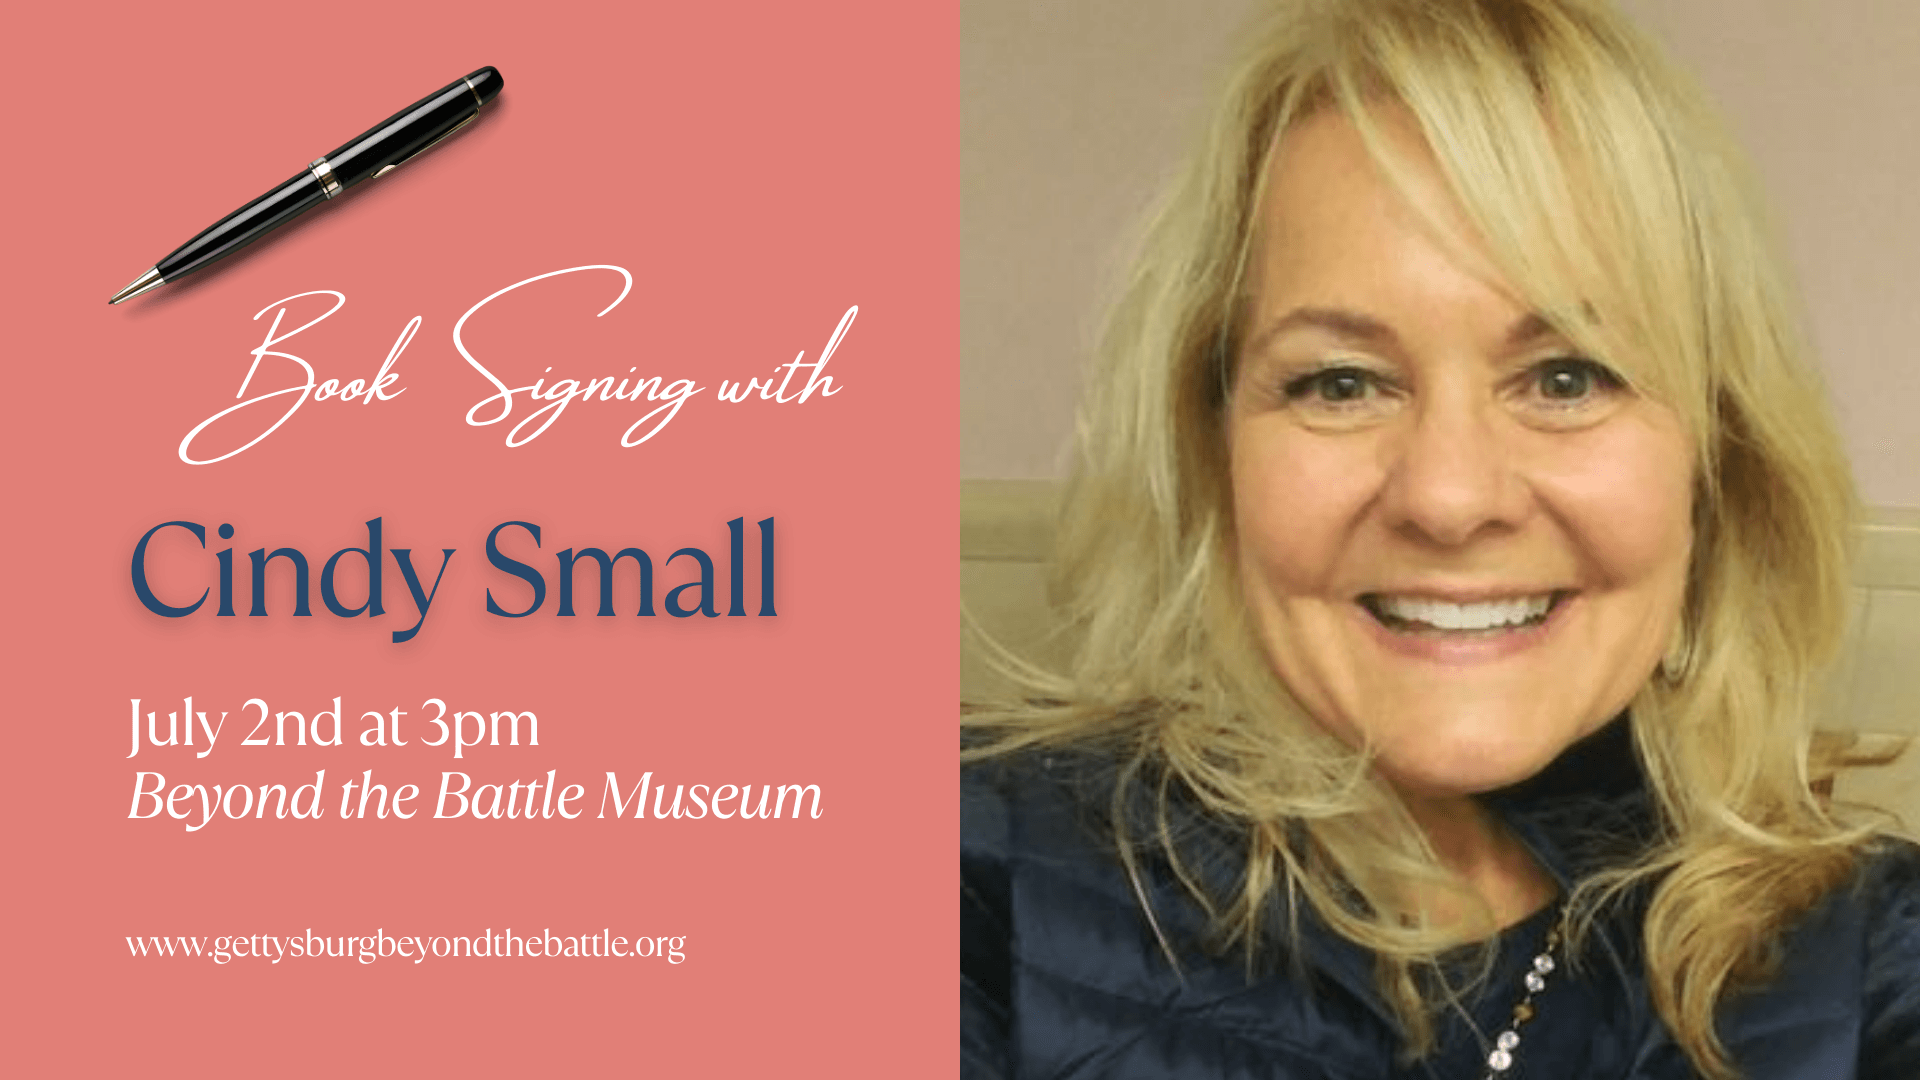 Book Signing with Cindy Small